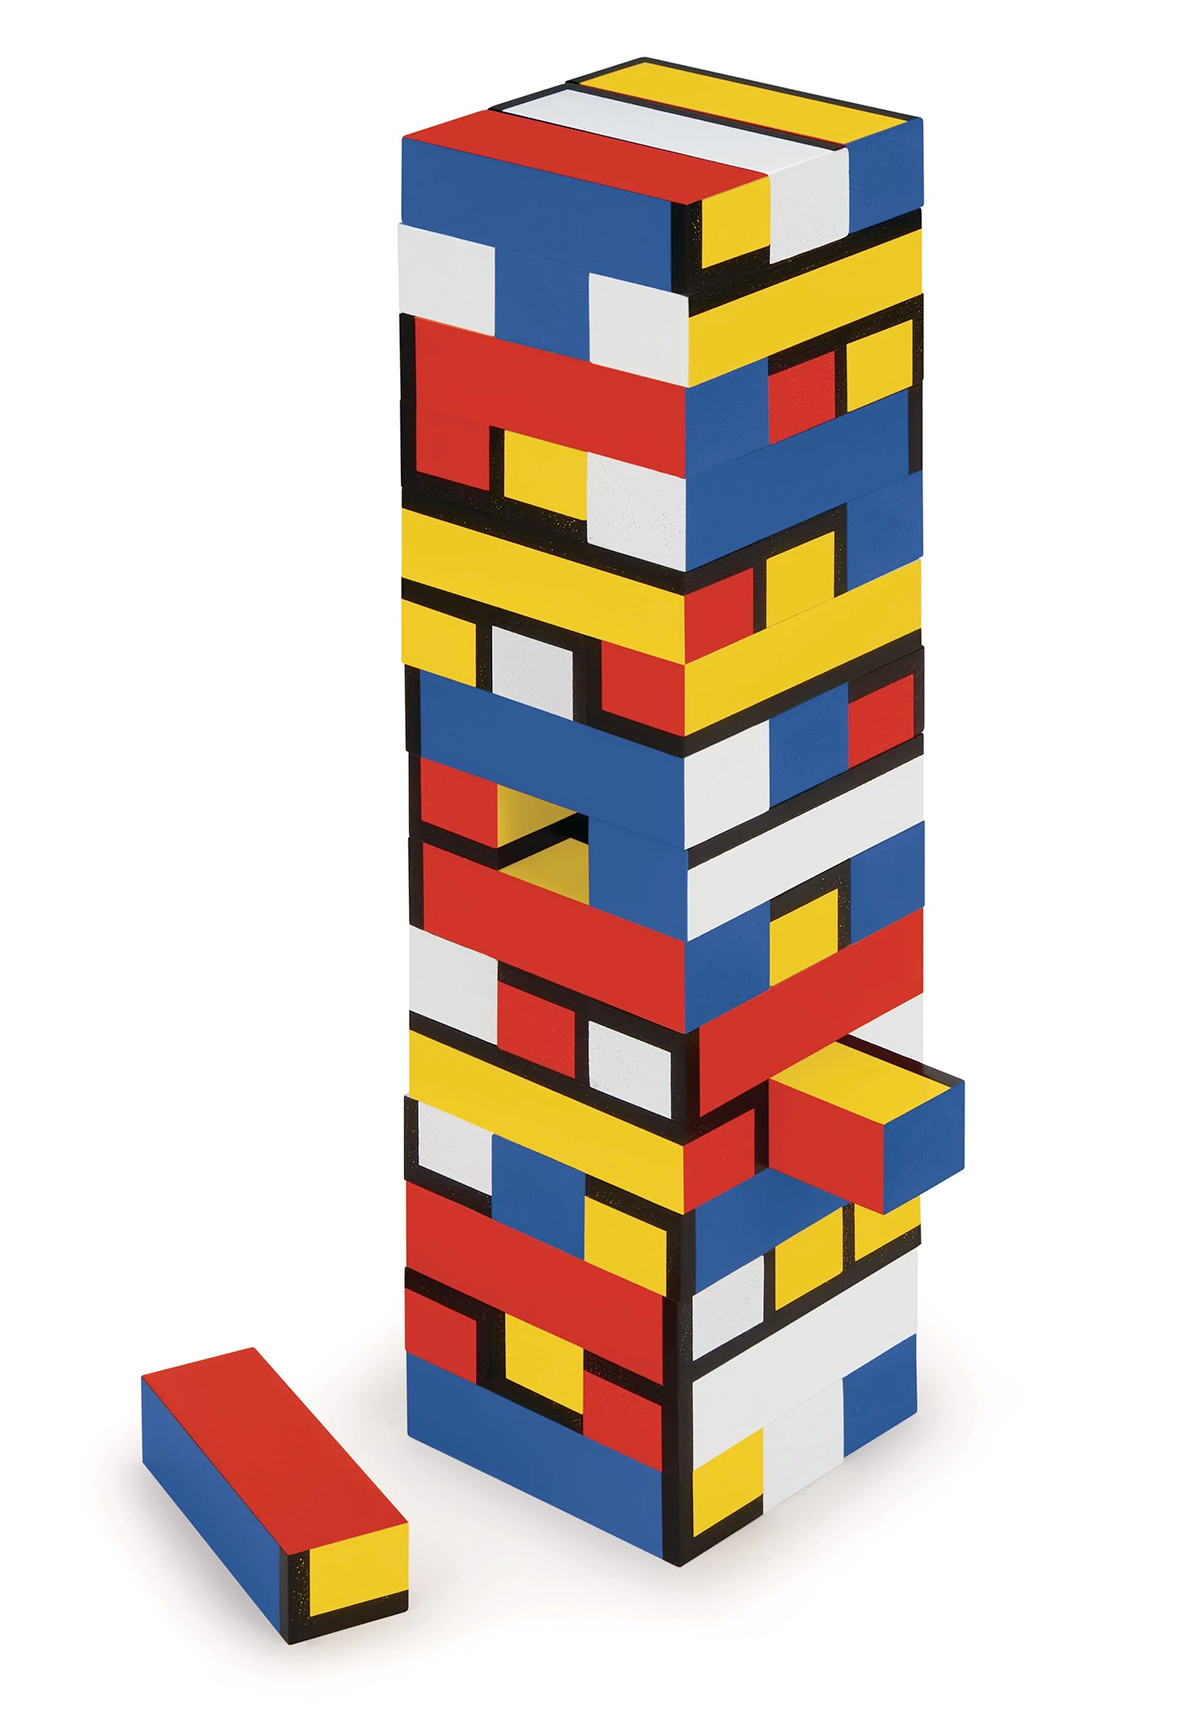 Stacking Game De Stijl Jenga in the Colorful Style of Piet Mondrian (MoMA)